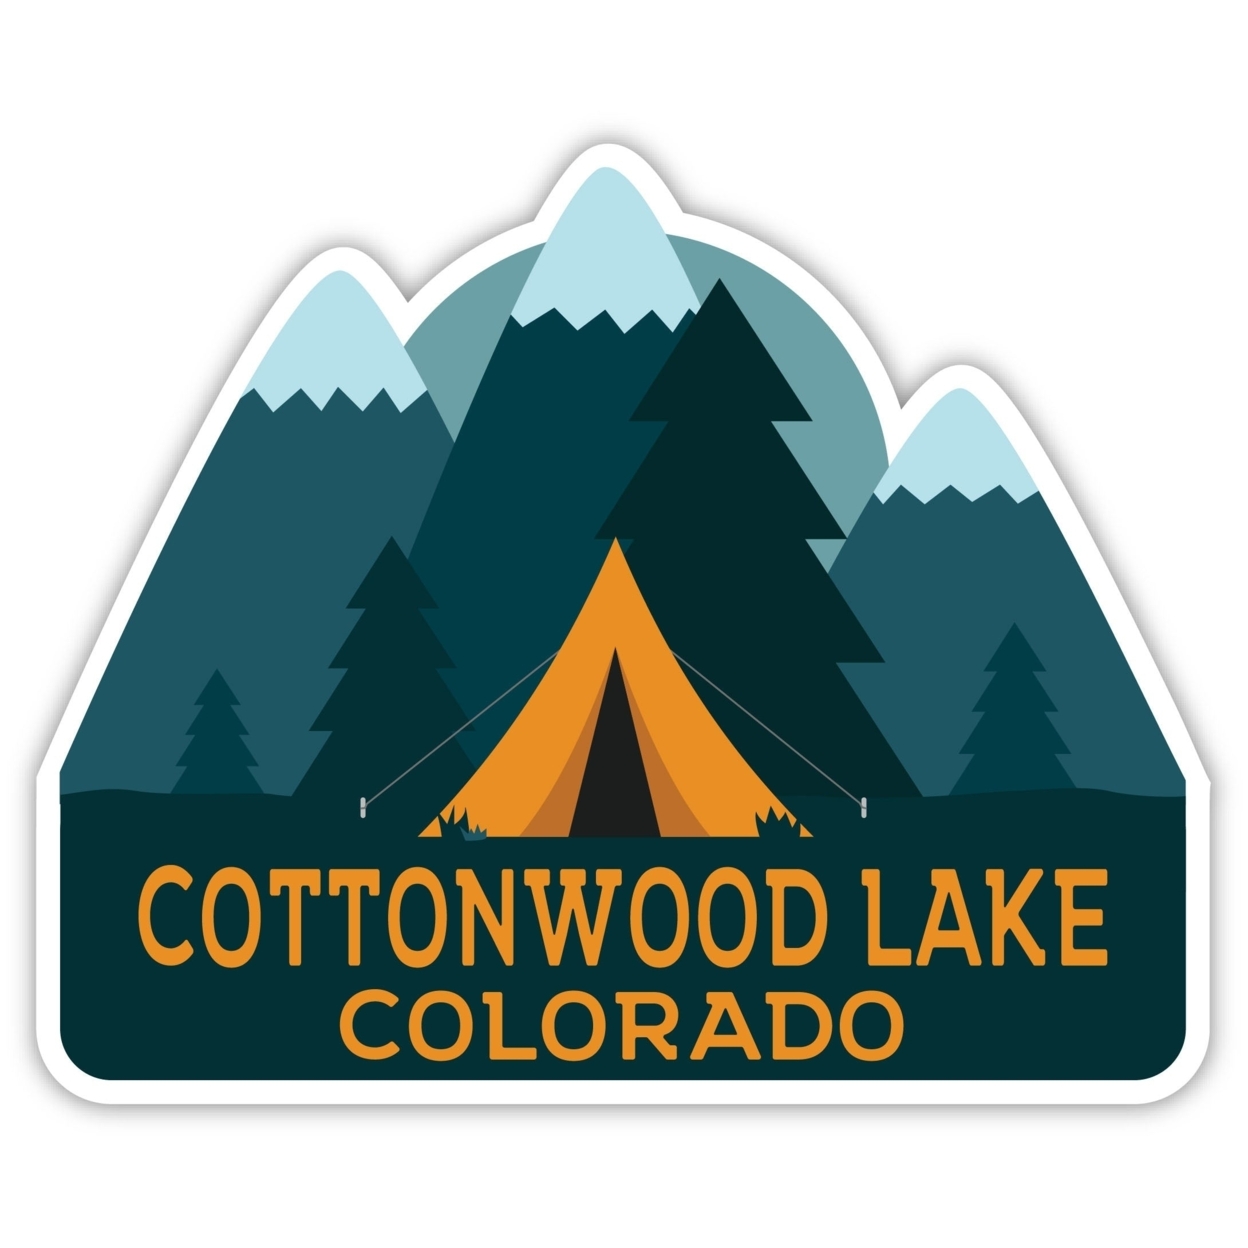 Cottonwood Lake Colorado Souvenir Decorative Stickers (Choose Theme And Size) - Single Unit, 4-Inch, Great Outdoors